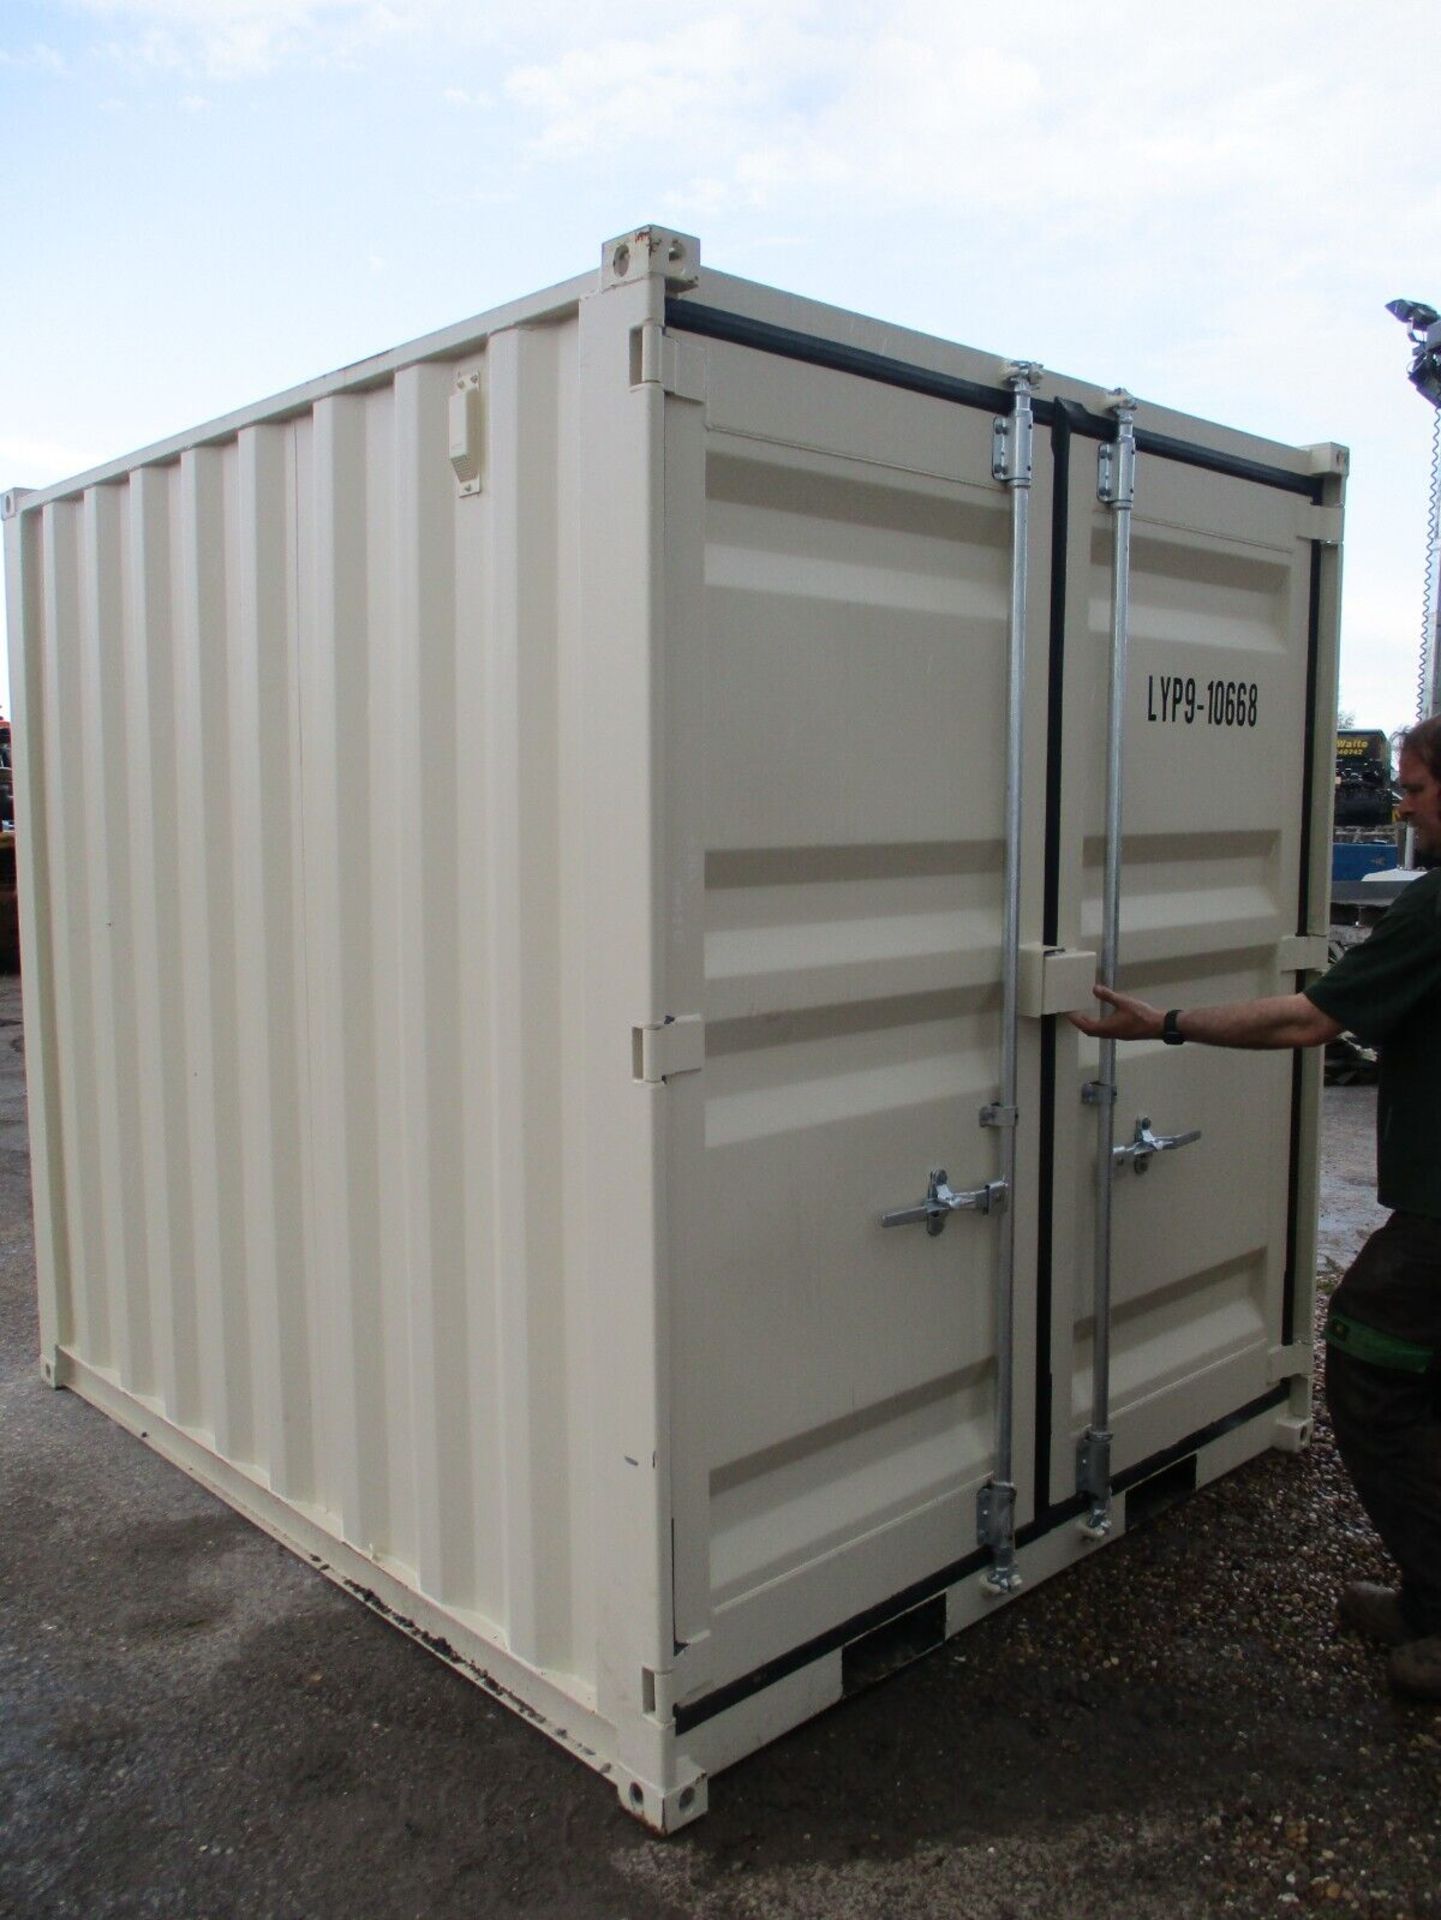 YOUR HOME OFFICE AWAITS: 9-FOOT CONTAINER WITH WINDOW - Bild 4 aus 7